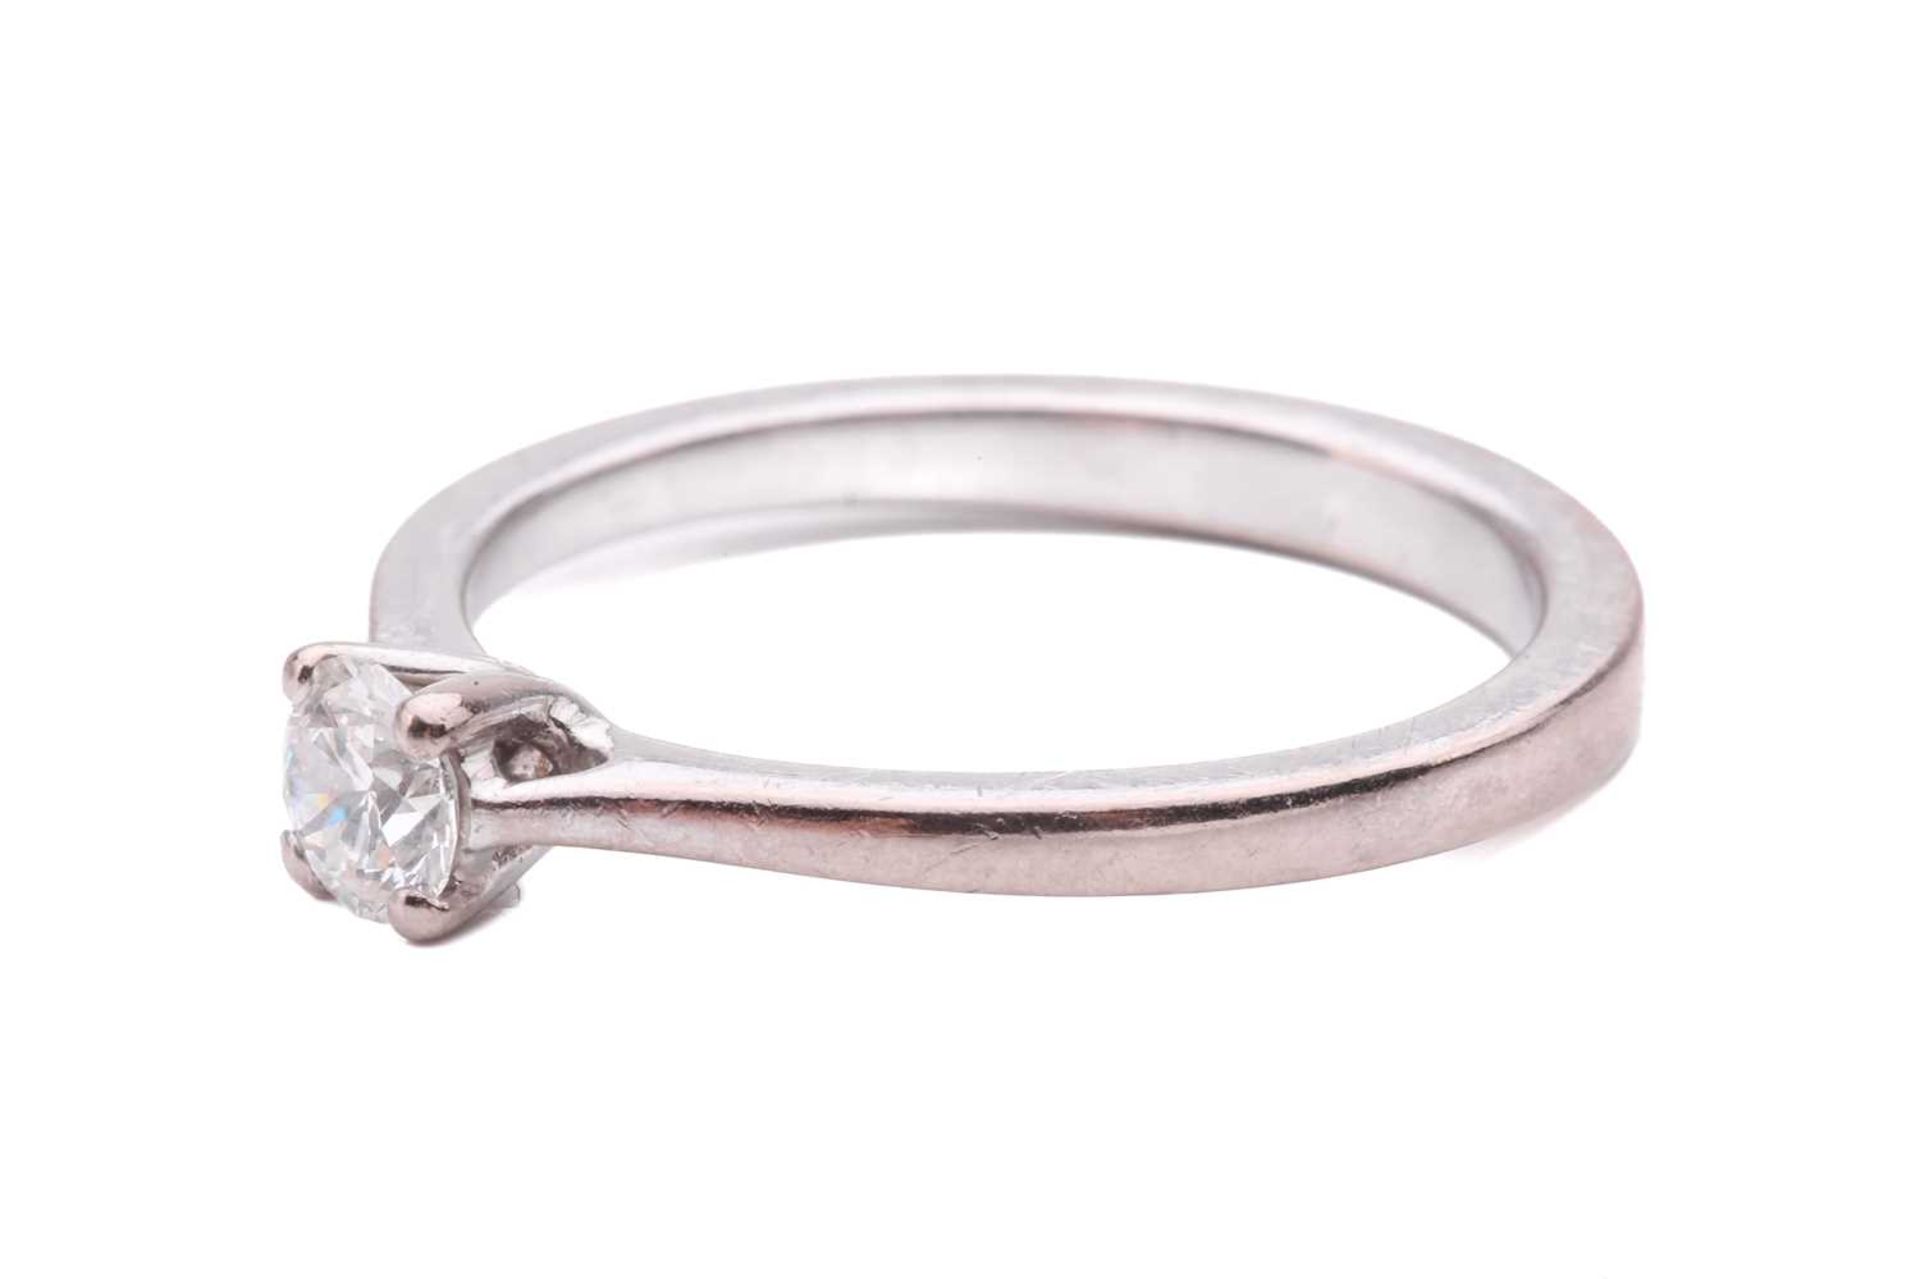 A diamond solitaire ring, set with a round brilliant cut diamond with an estimated weight of 0.35ct, - Image 2 of 4